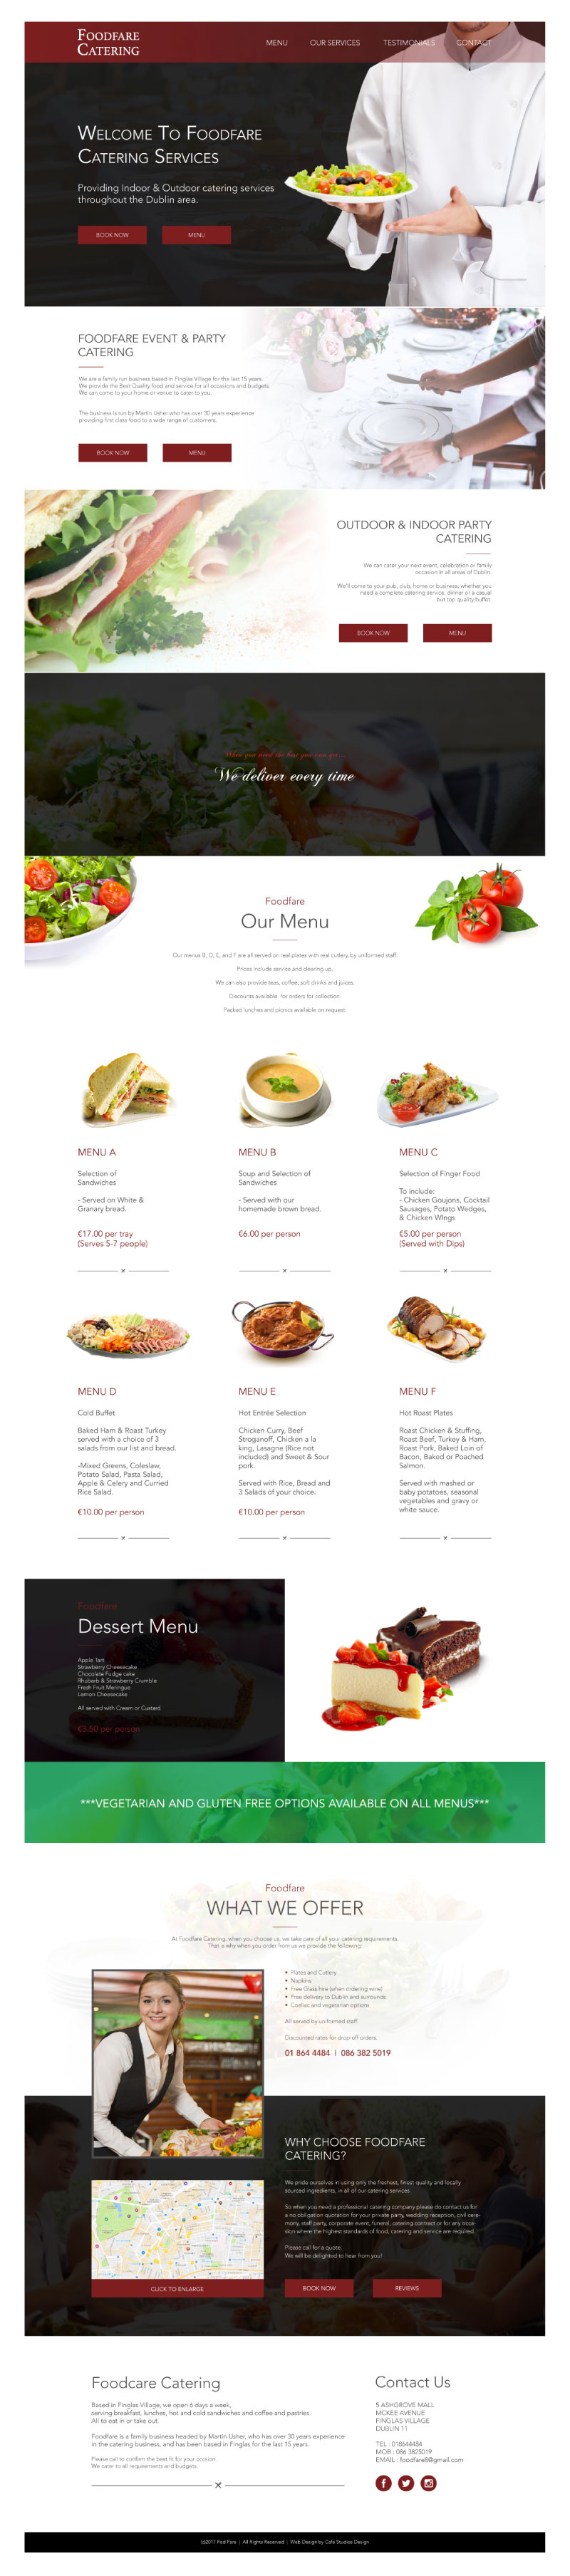 Cafe Studios Design - Homepage Preview _ Food Fare